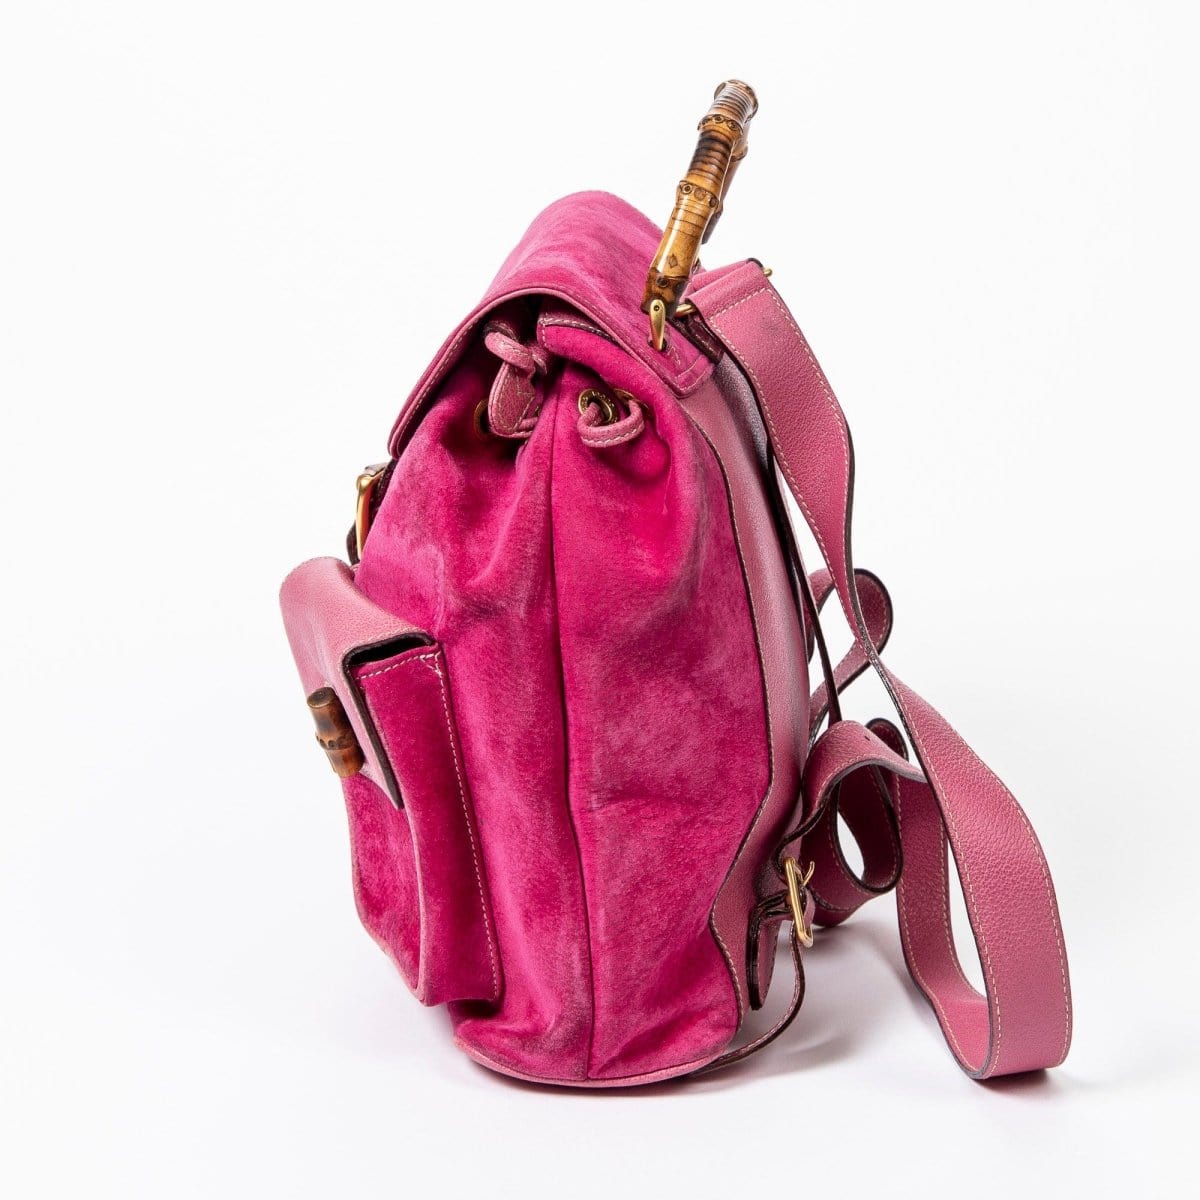 7. Lp x christos Gucci Bamboo Backpack Gucci Vintage Bamboo Backpack in Pink - AWL2305